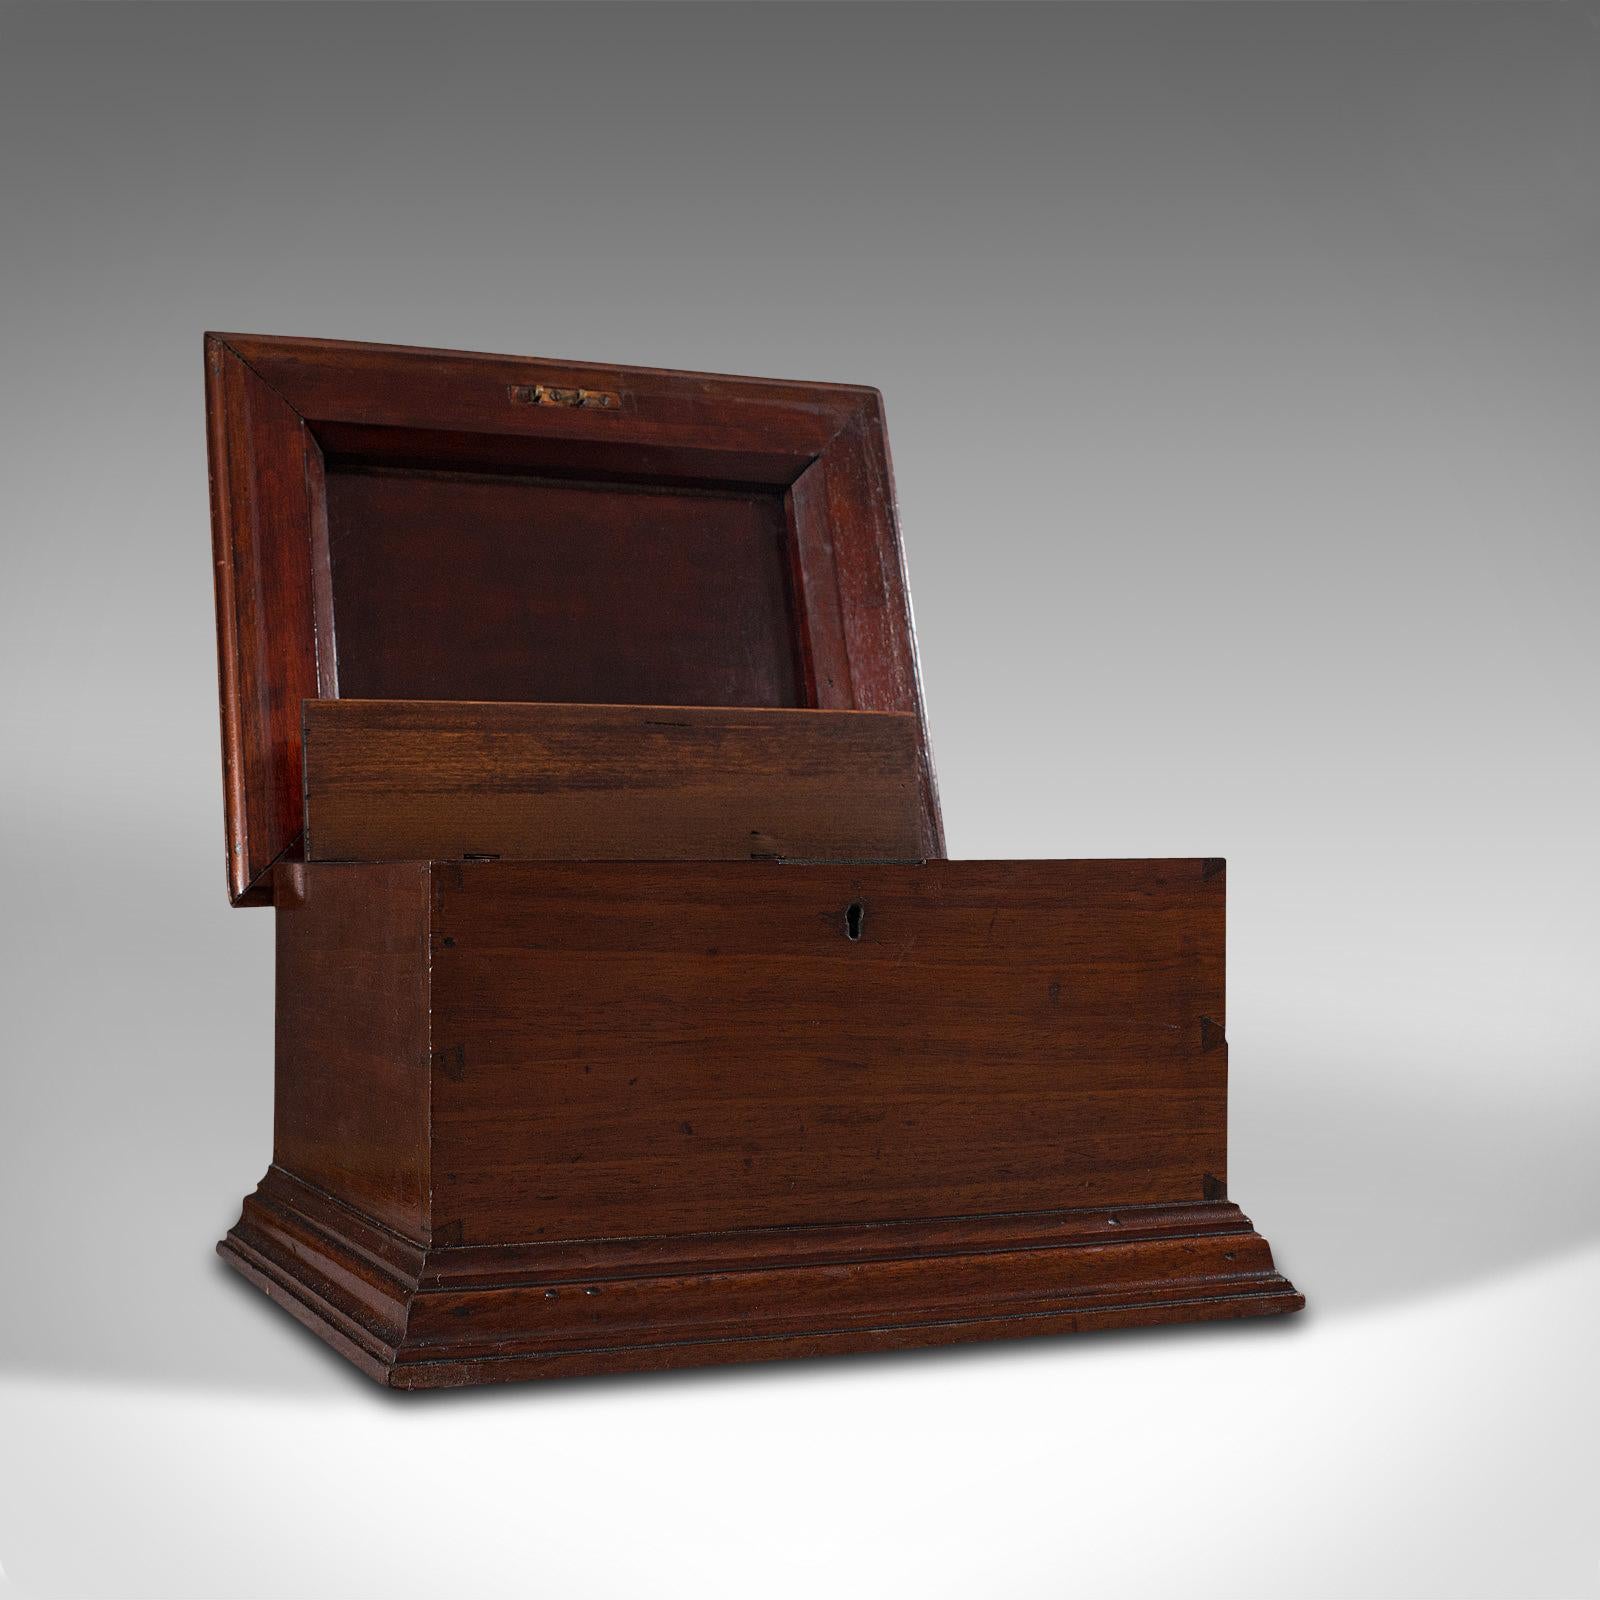 This is a small antique document box. An English, walnut desk or pen sarcophagus, dating to the Victorian period and later, circa 1880.

A quality document store with fine figuring
Displays a desirable aged patina, in very good order
Select